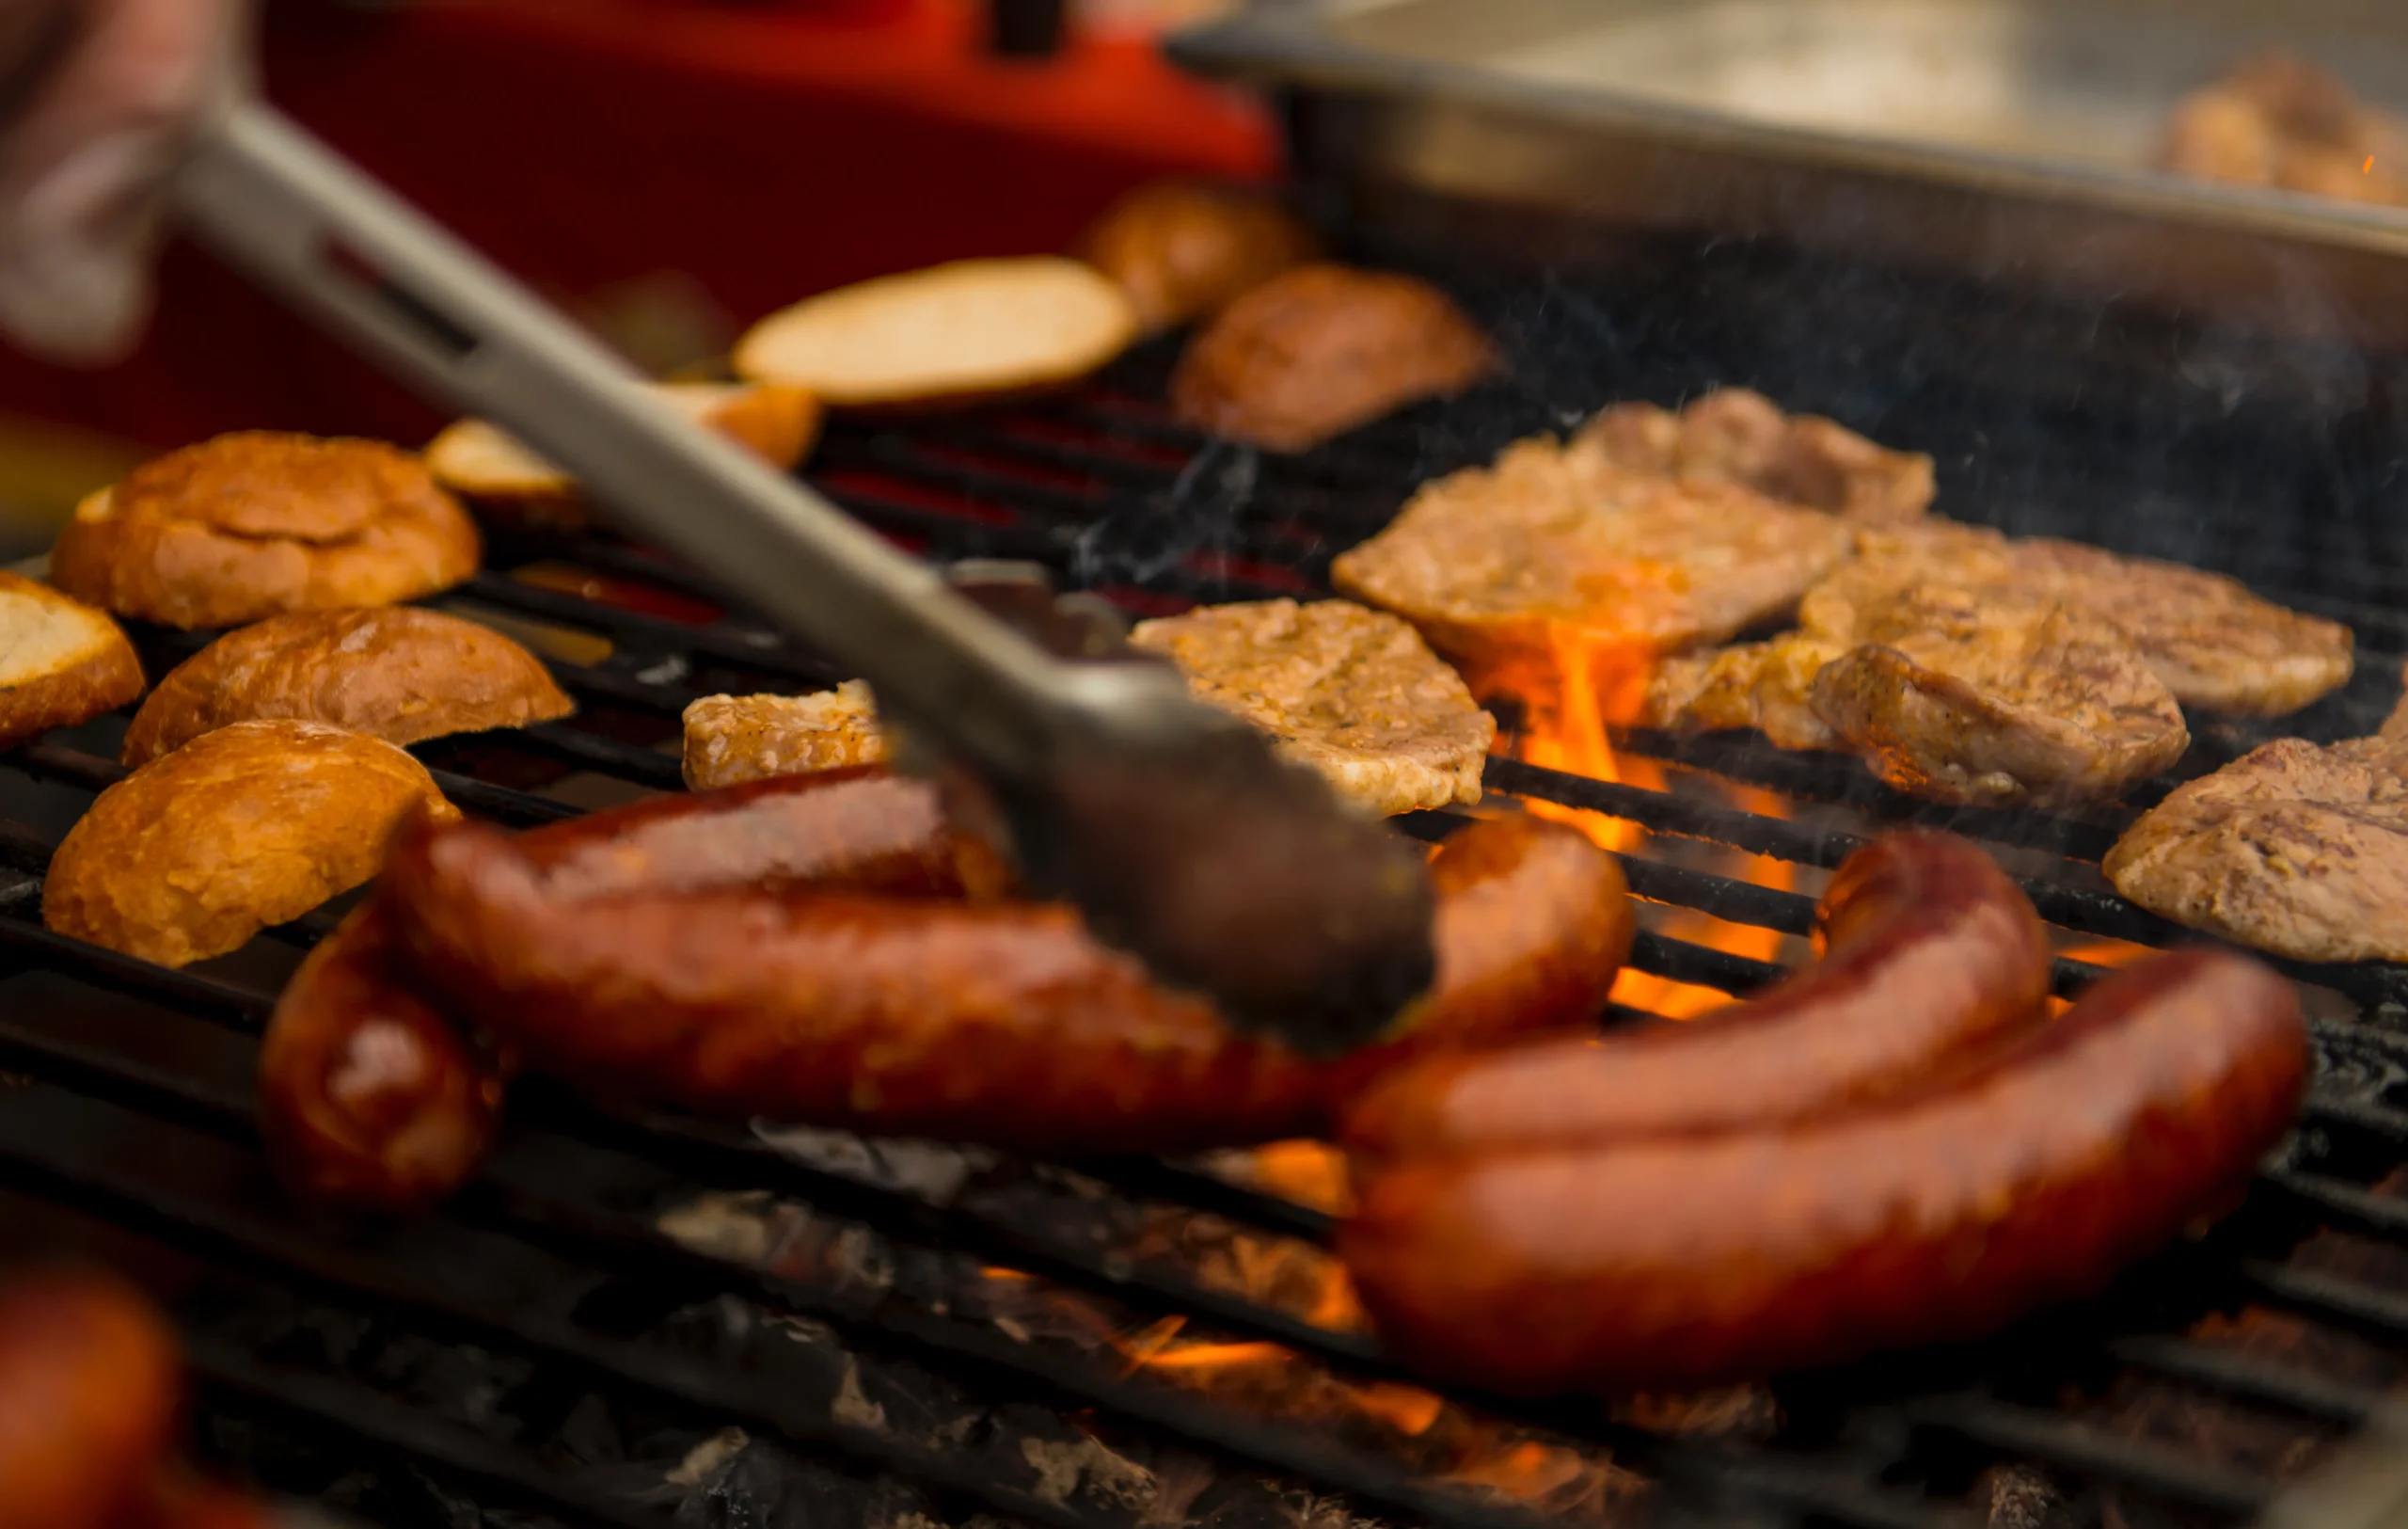 Pellet Grill vs Gas Grill: Which is the Better Choice for Your Next BBQ?